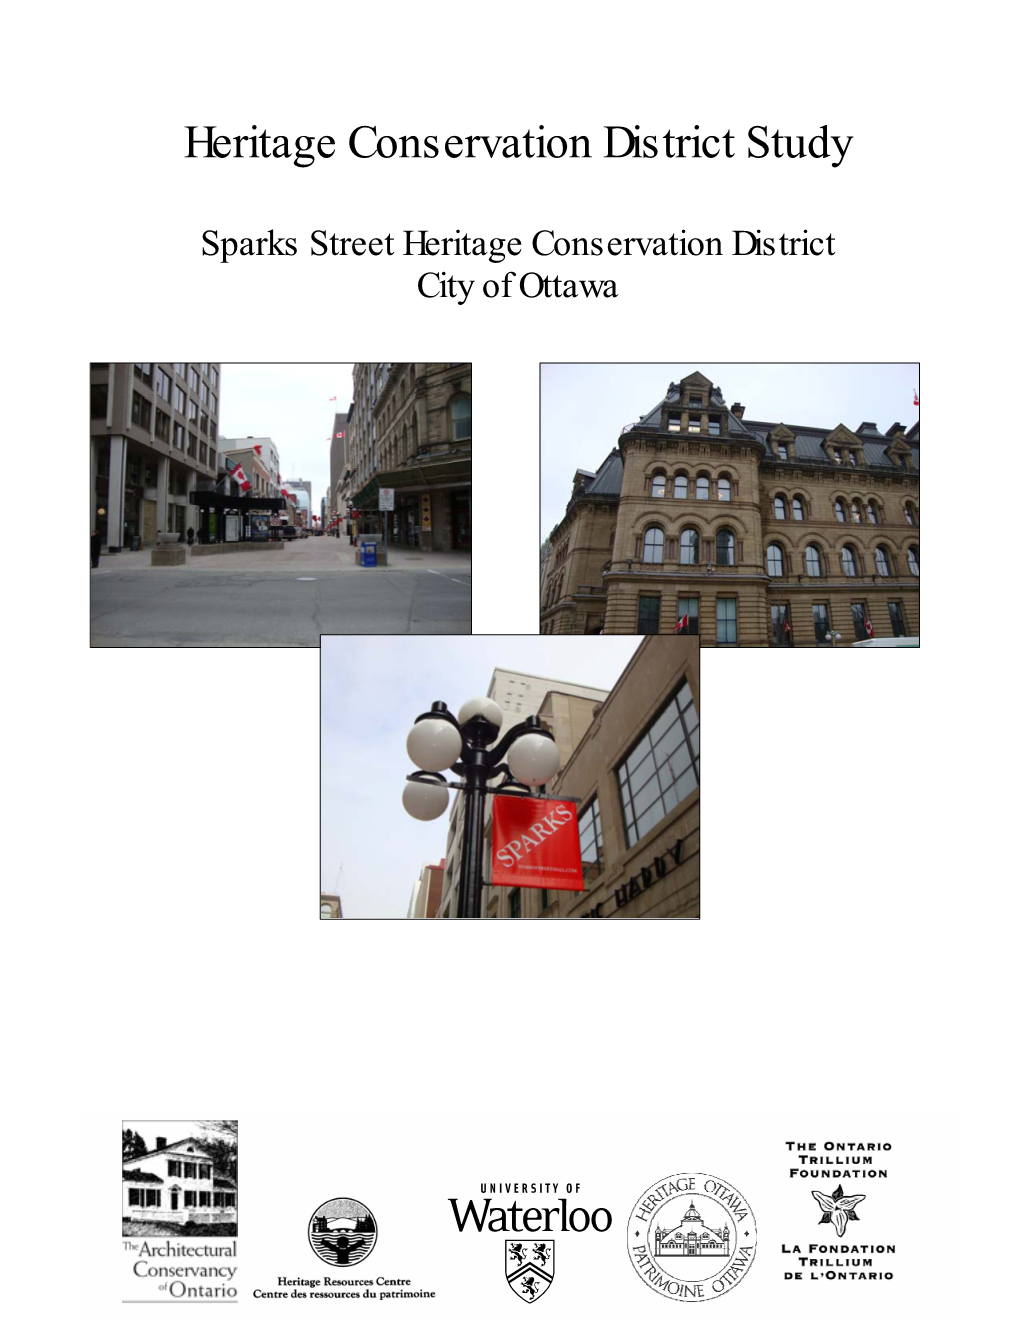 Sparks Street Heritage Conservation District City of Ottawa